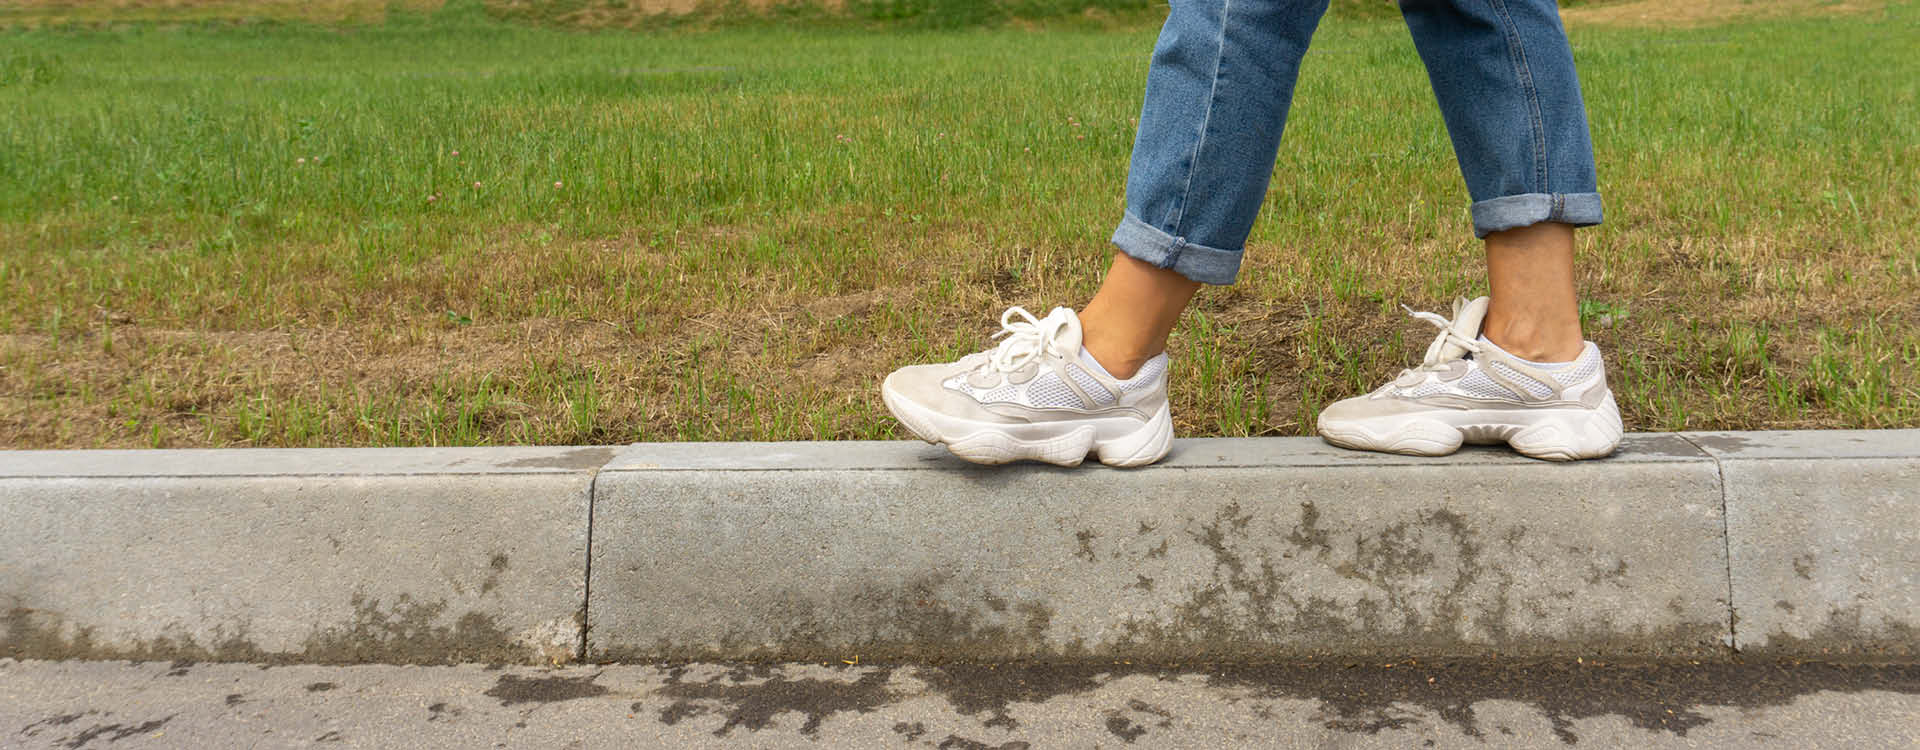 Does Curb Walking Actually Help Induce Labor? Article Image